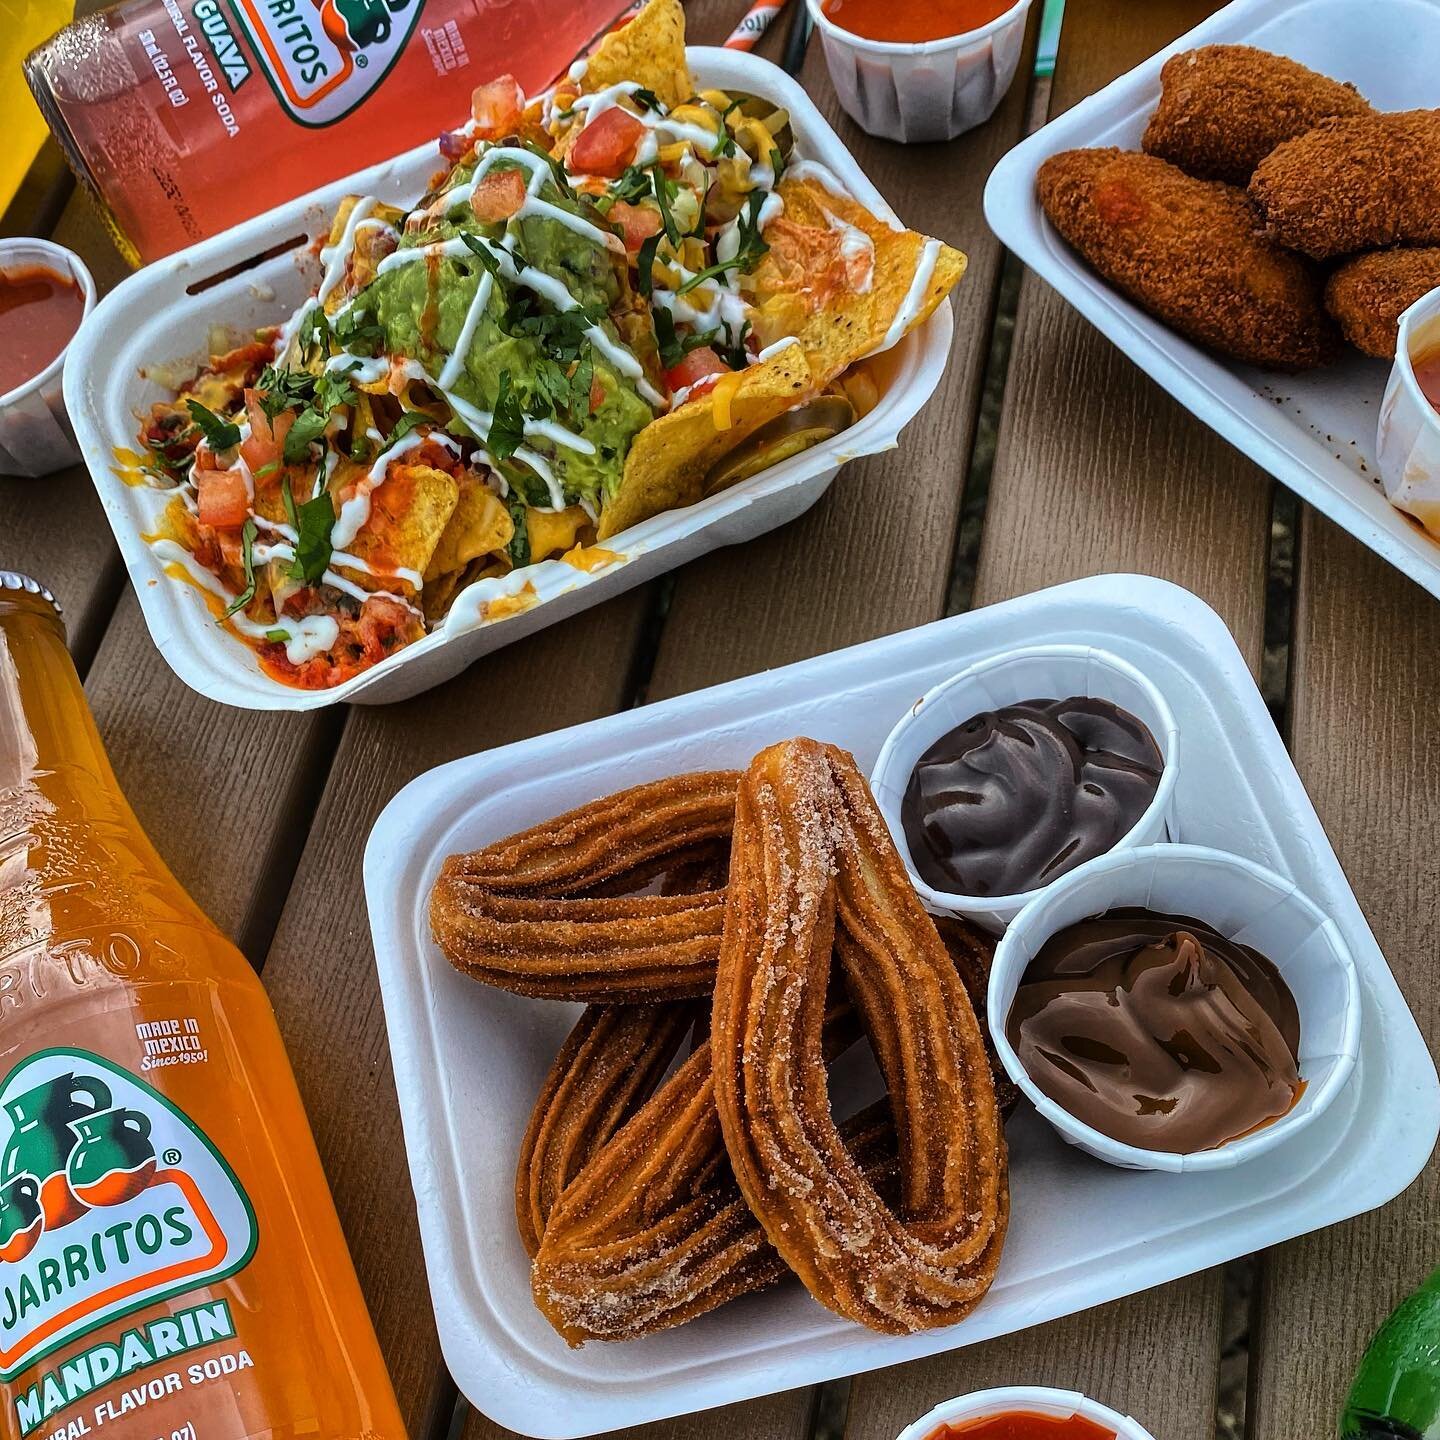 Cheeky Churros anybody? Why not pop down to Dorindos for a delicious sweet treat&hellip; you know you want to! 😋😋😋😋😋😋😋😋😋😋😋

#sweettreats #churros #mexico #harwell #nachos #jalepenopoppers #deliciousoxford #dorindos #dishoftheday #youknowyo